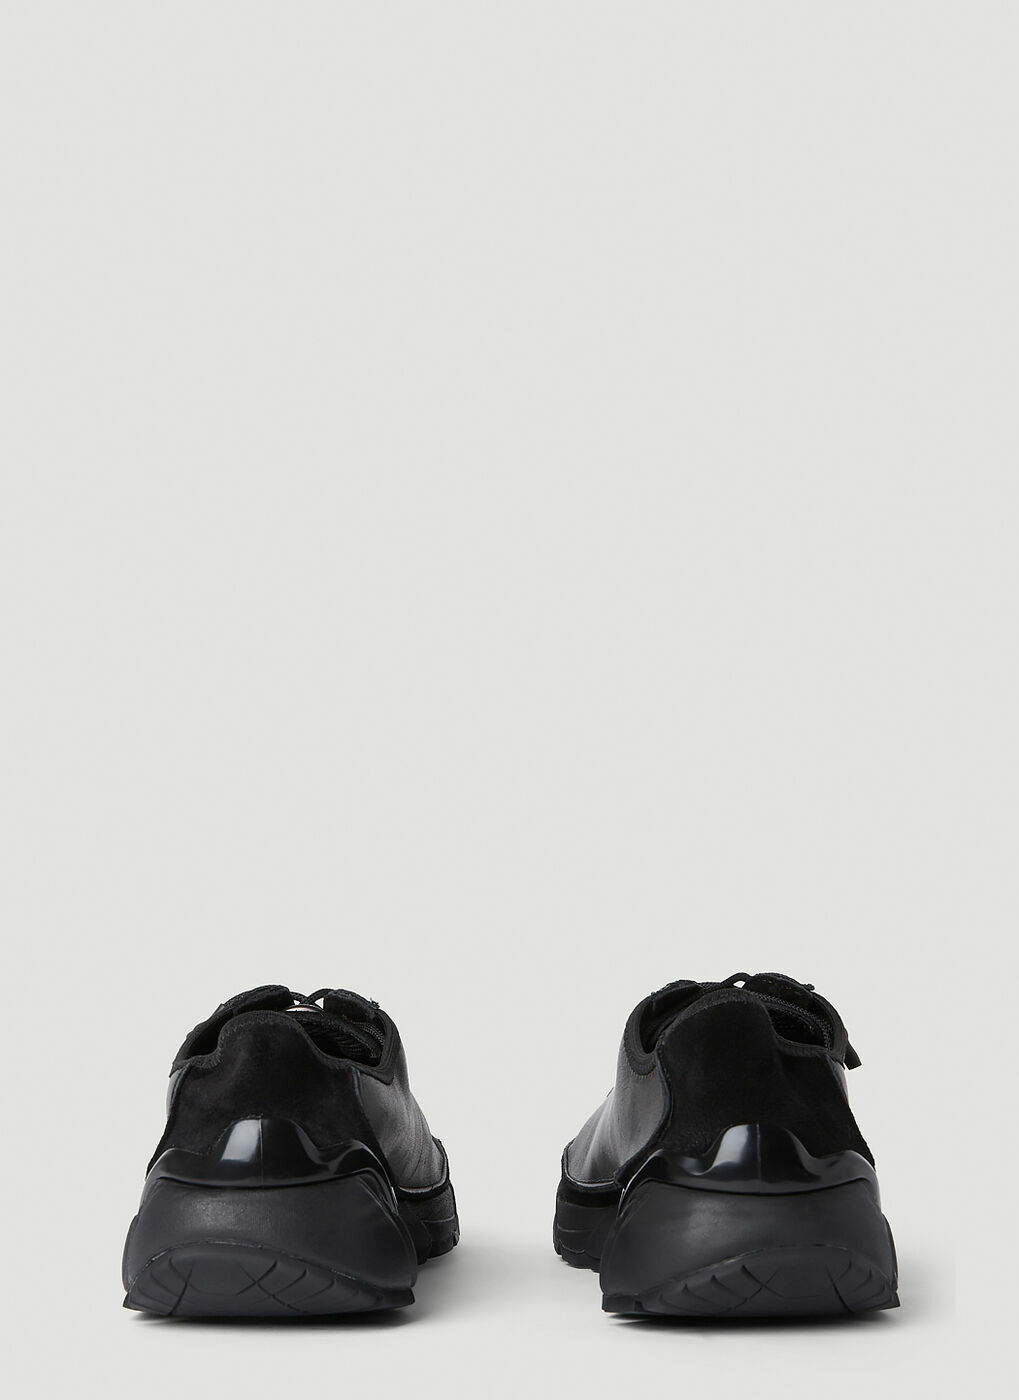 Our Legacy - Klove Sneakers in Black Our Legacy